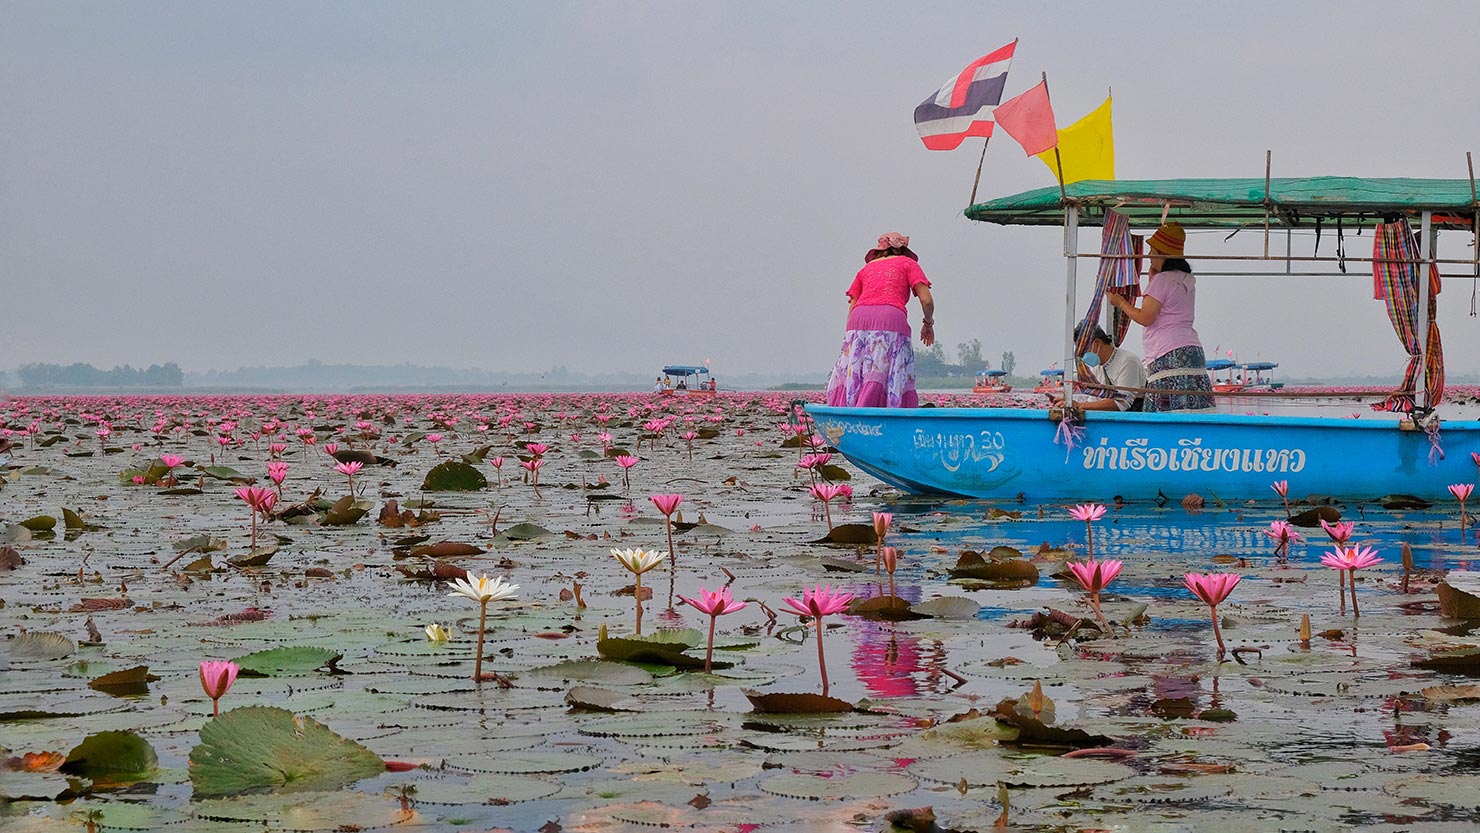 Passengers get up close with the pink lilies that bloom on Talay Bua Daeng during the winter months